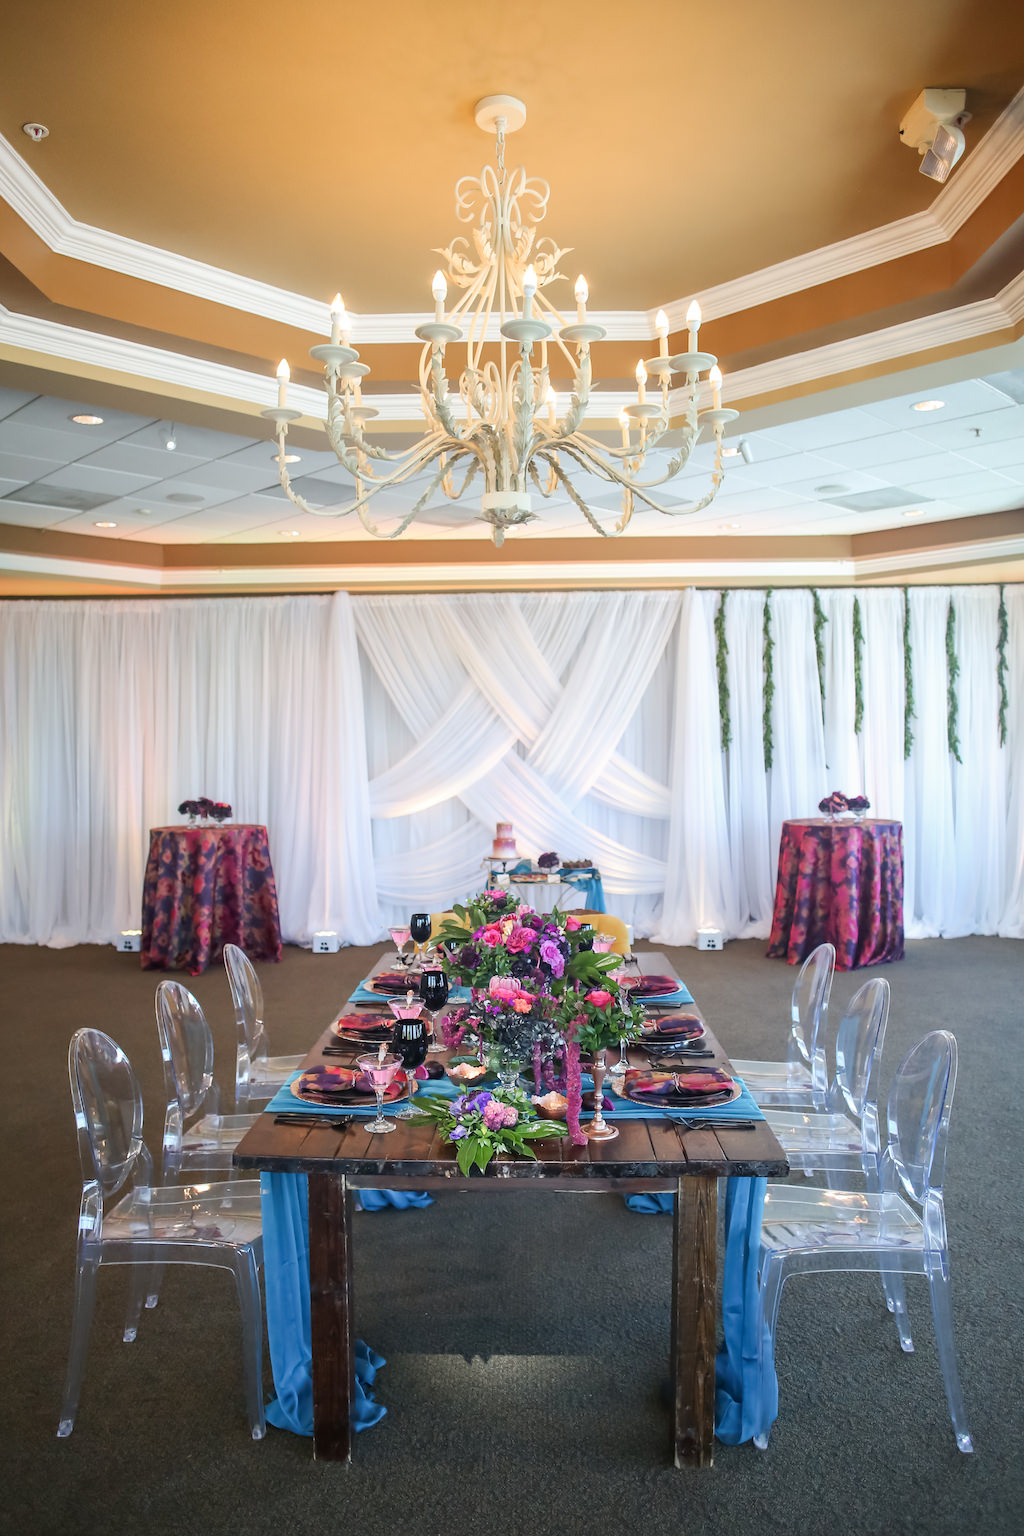 Vibrant, Modern Ballroom Wedding Reception with Rustic Wooden Feasting Table, Turquoise Linens, Low Fuchsia and Greenery Centerpieces, Clear Plastic Chairs, and White Draping | Tampa Bay Wedding Venue Isla Del Sol Yacht and Country Club | Planner Kelly Kennedy Weddings and Events | Draping and Florist Gabro Event Services | Furniture Rentals A Chair Affair